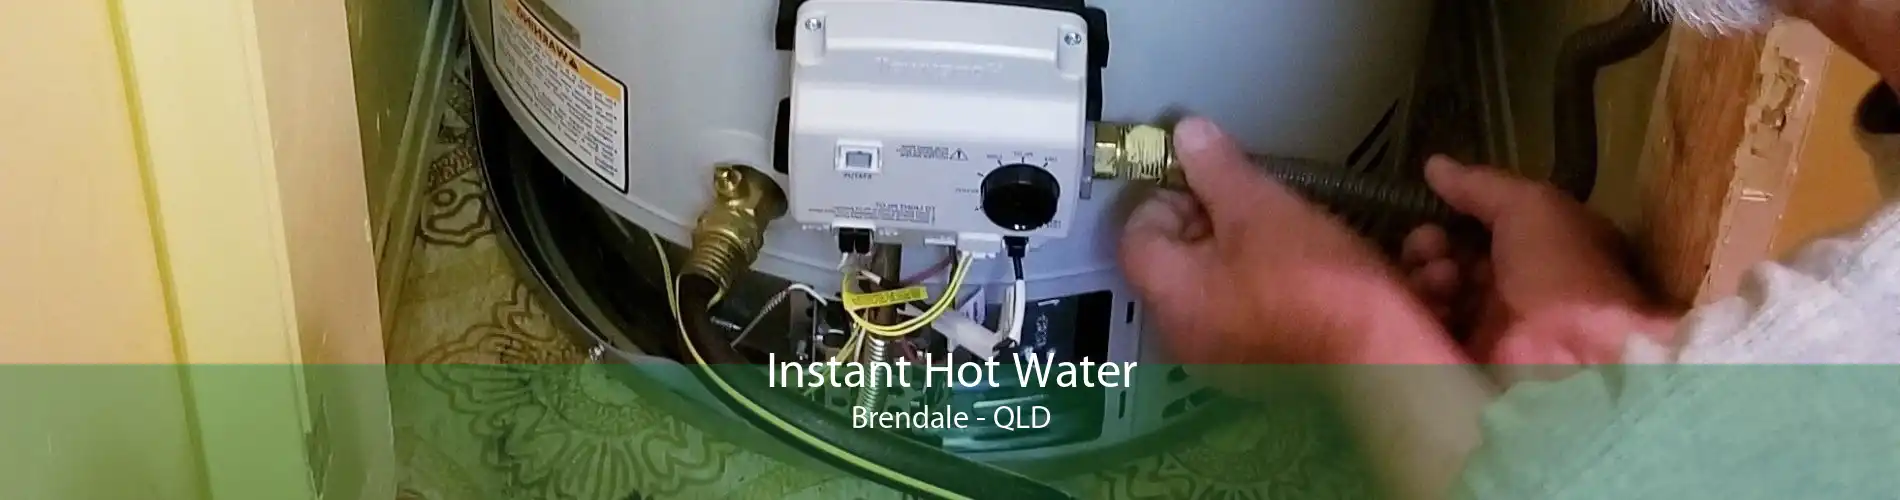 Instant Hot Water Brendale - QLD